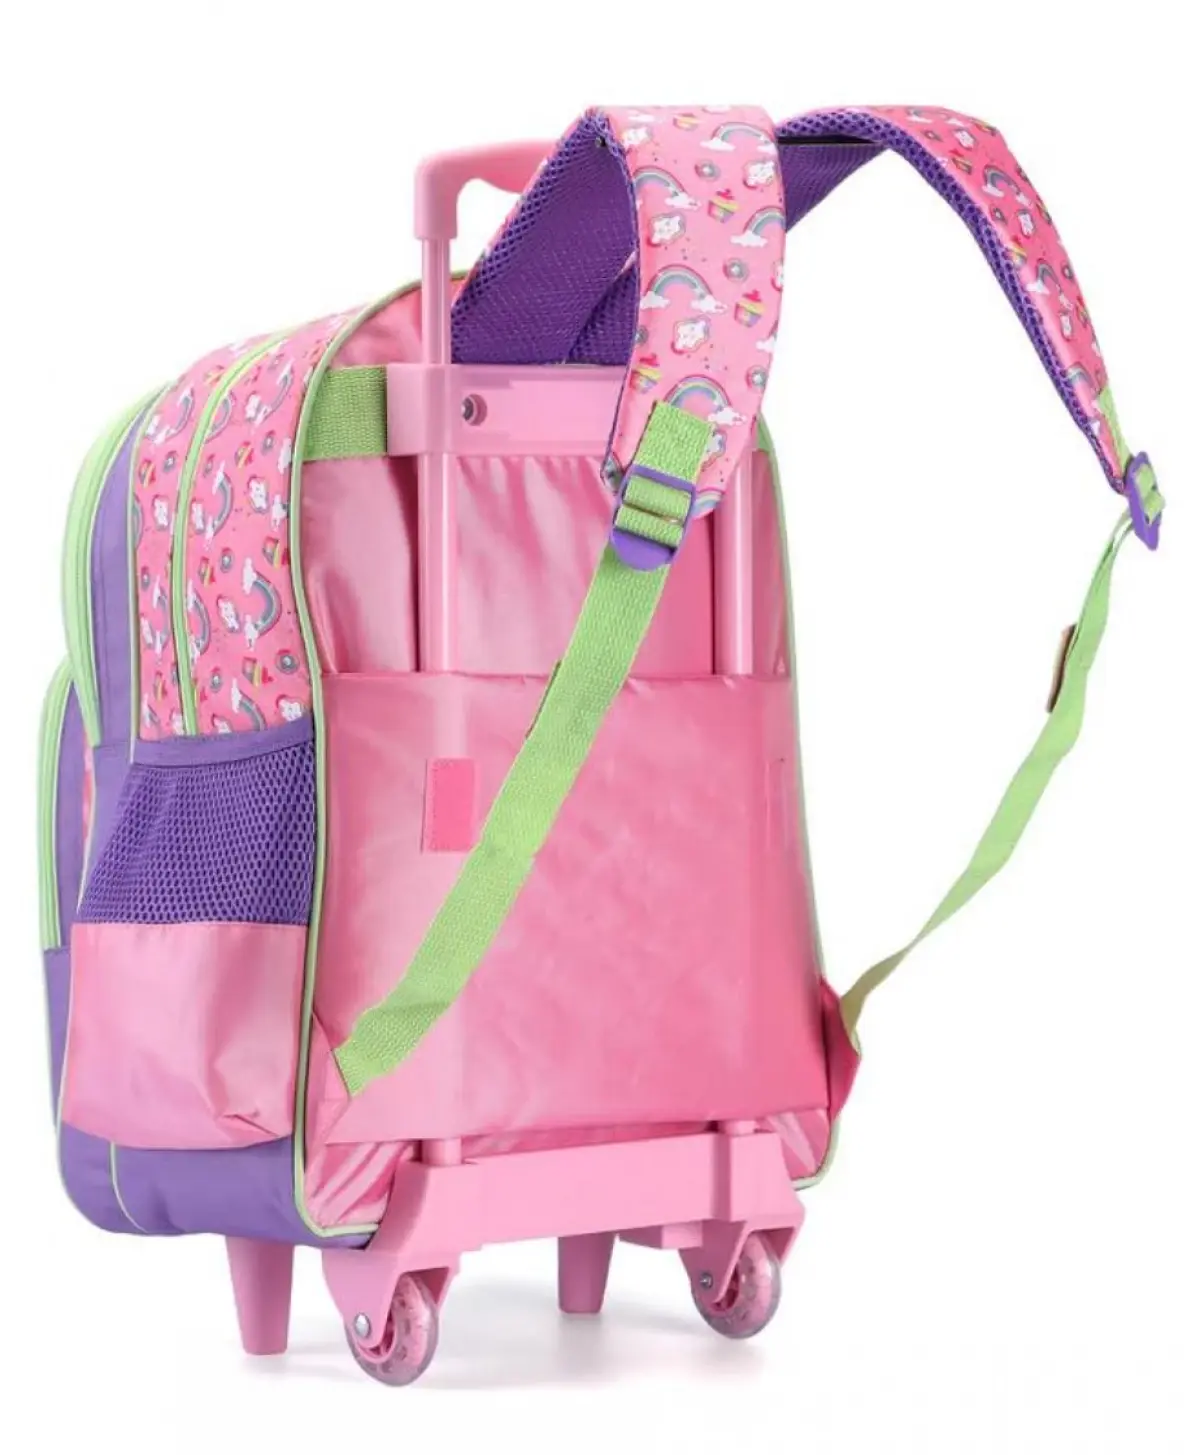 Striders 18 inches Barbie School Trolley Bag Dreams in Style for Little Fashionistas Multicolor For Kids Ages 8Y+